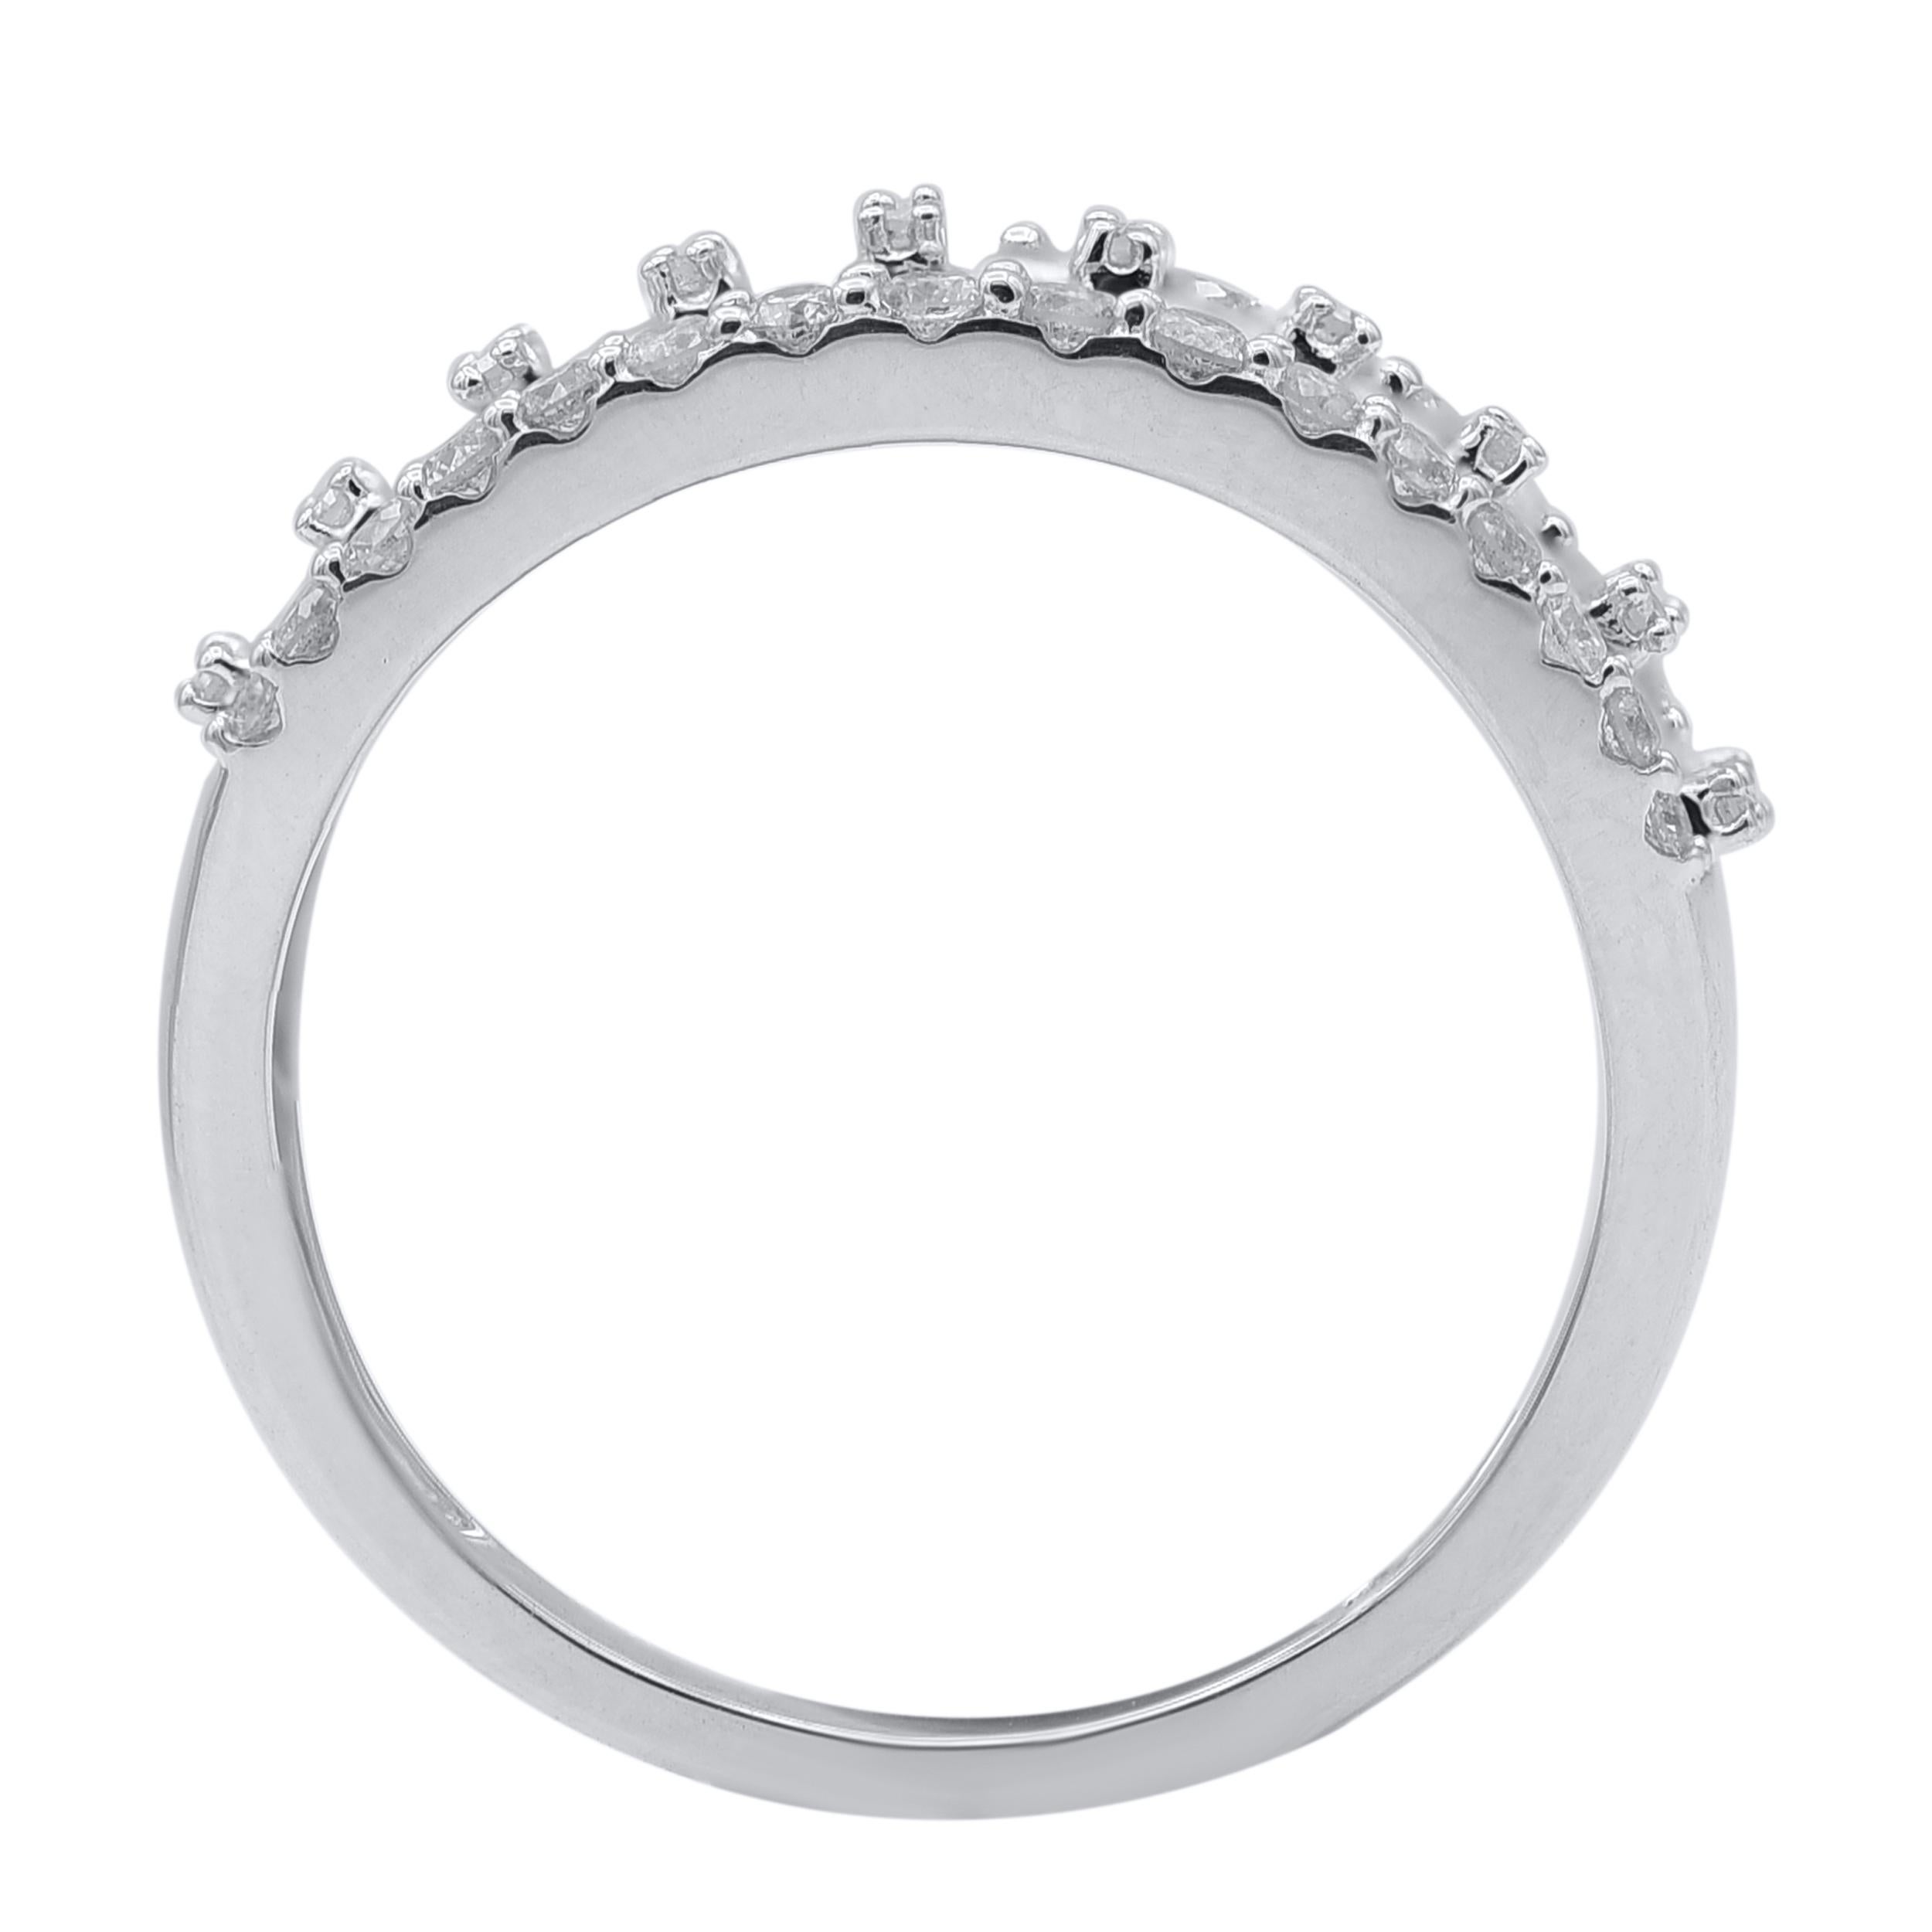 Bring charm to your look with this diamond ring. This beautiful ring is crafted in 14KT white gold, and studded with 118 single cut, brilliant cu and baguette cut natural diamonds in prong and channel setting. The total diamond weight of these